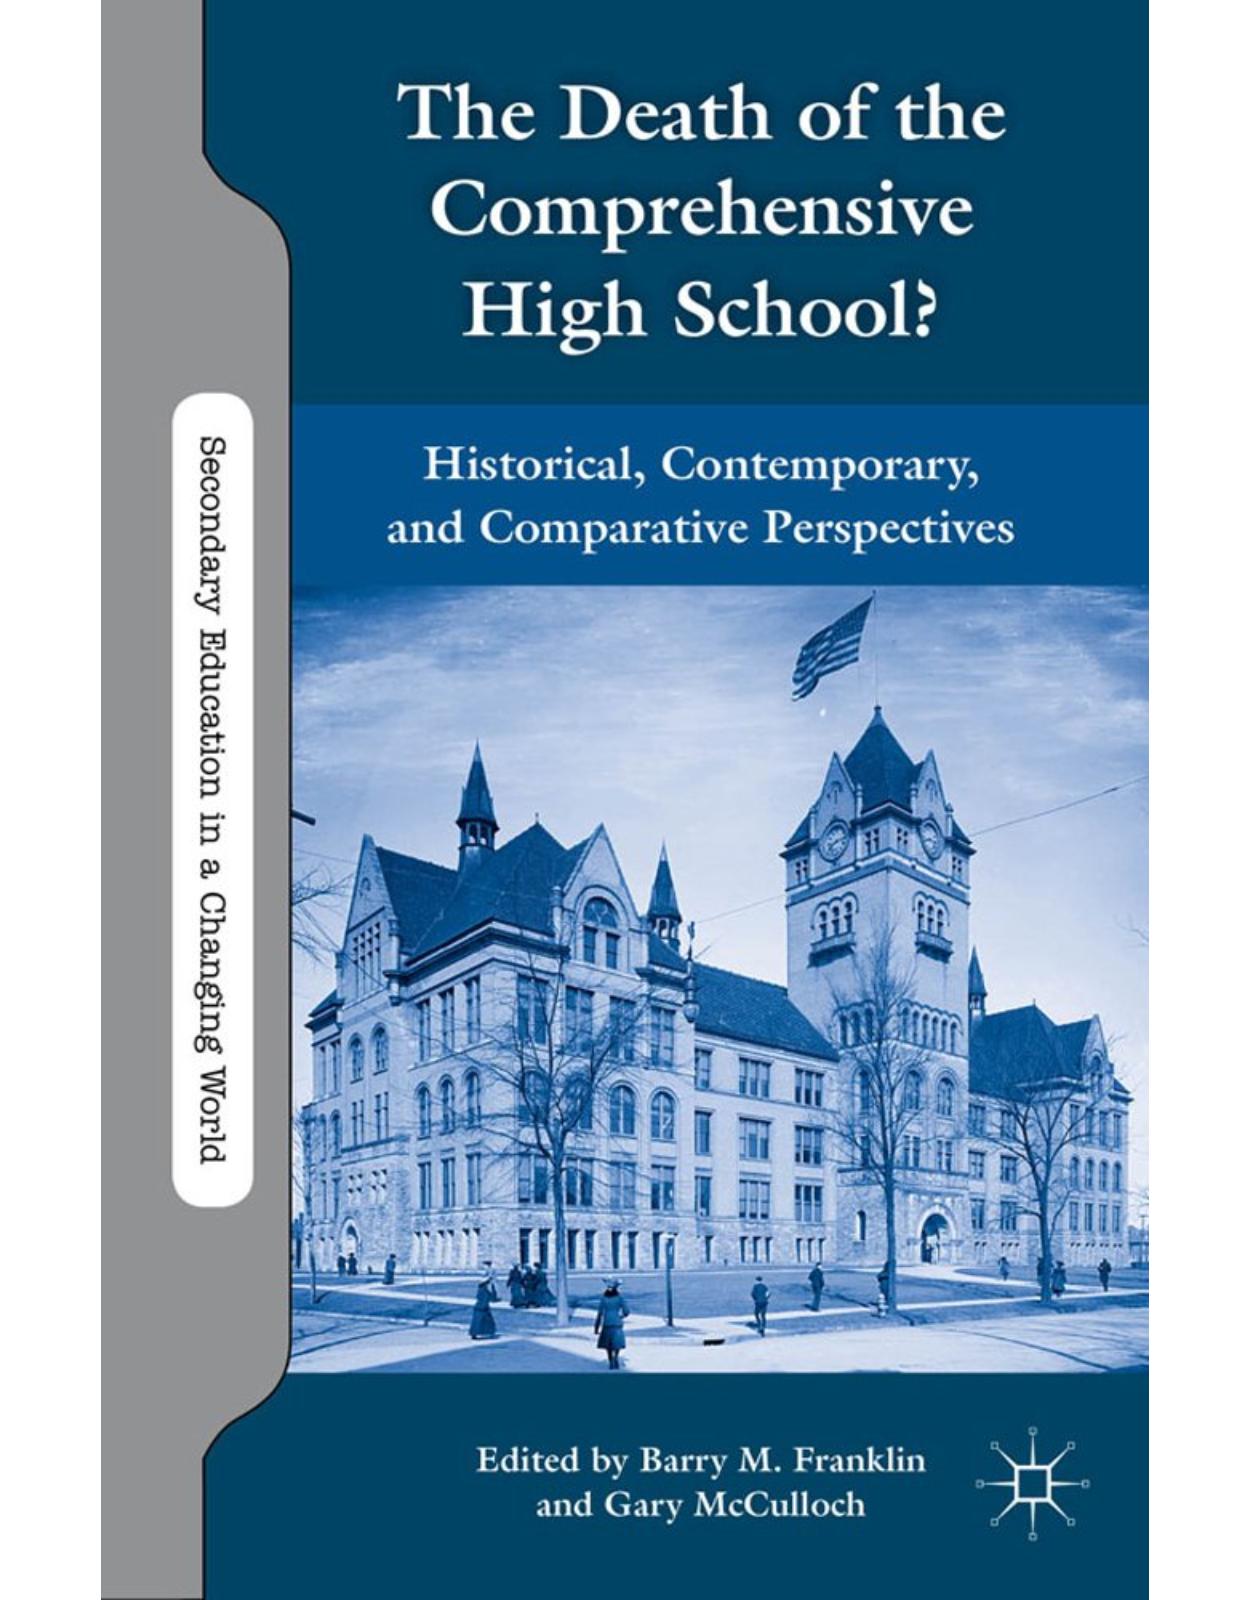 The Death of the Comprehensive High School?: Historical, Contemporary, and Comparative Perspectives (Secondary Education in a Changing World) 